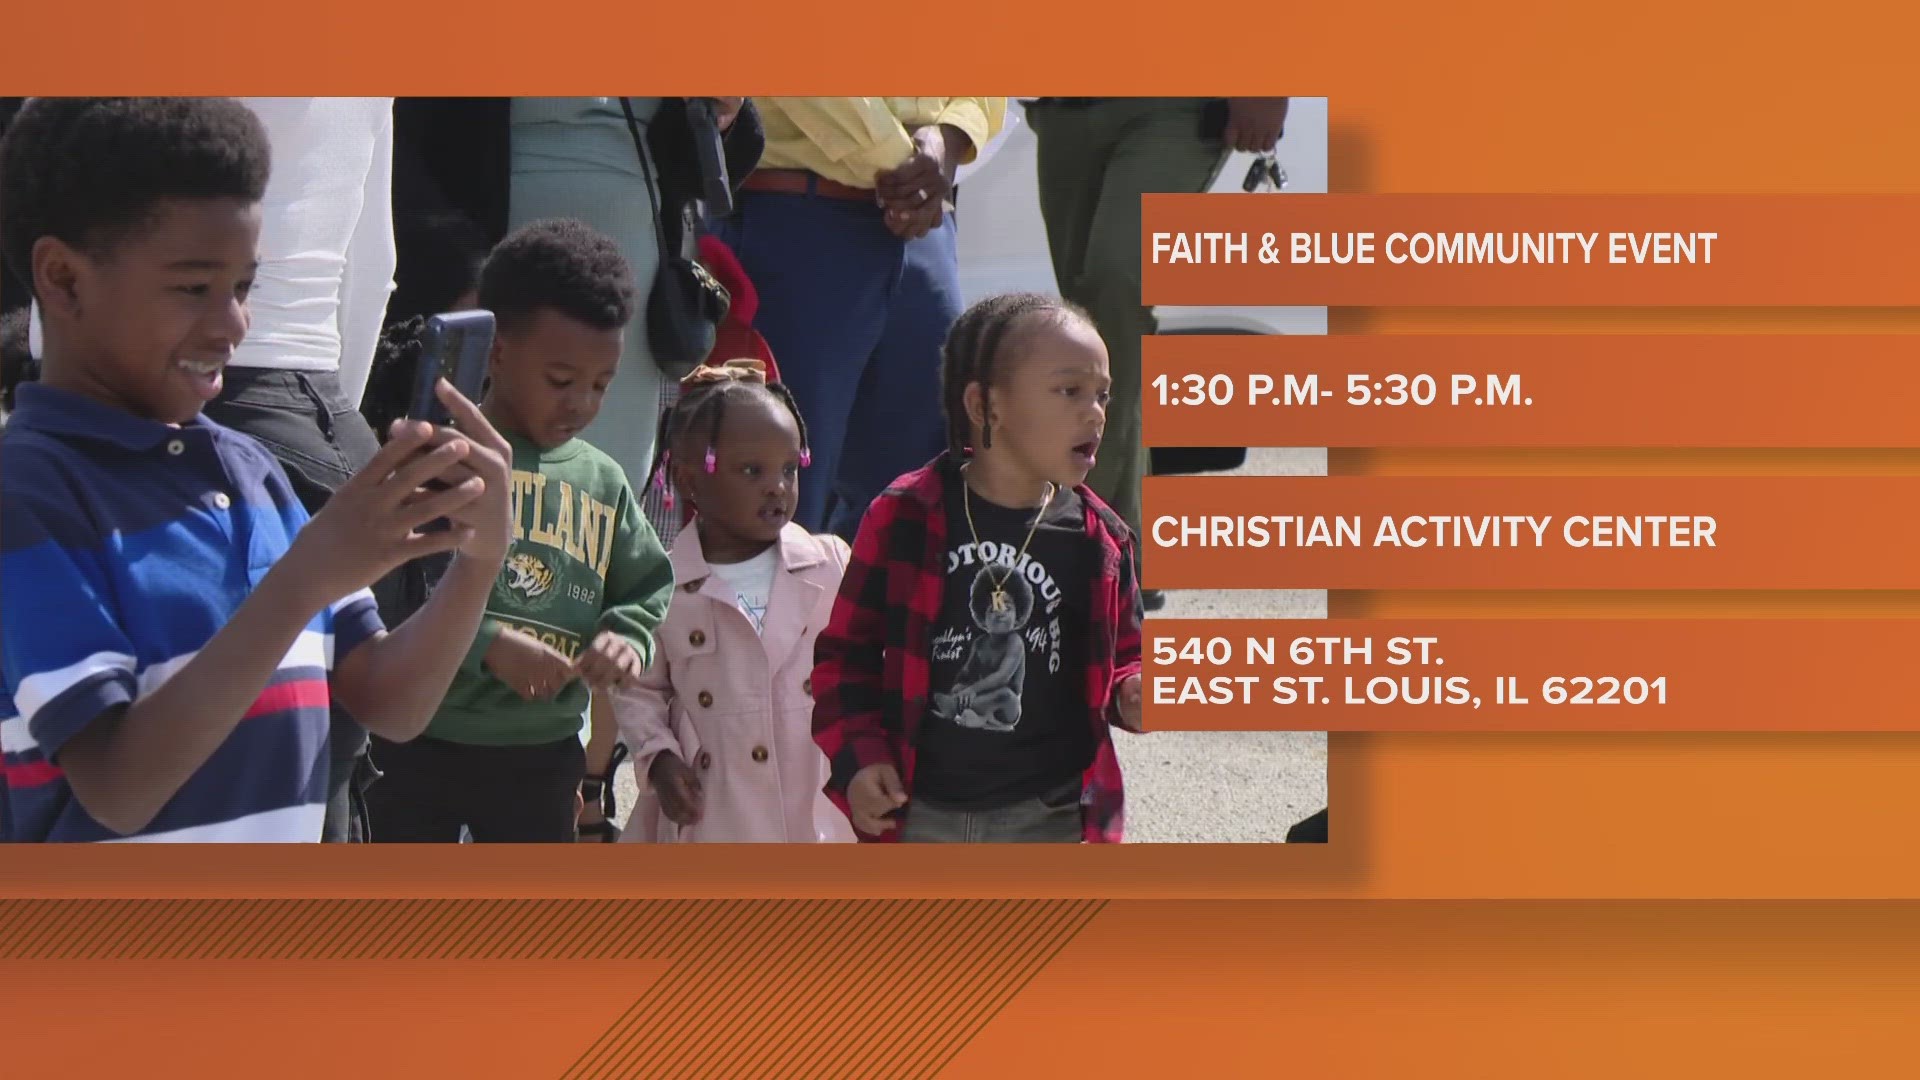 Law enforcement and faith leaders team up to put on community events where everyone can connect. An event will take place this afternoon in East St. Louis.